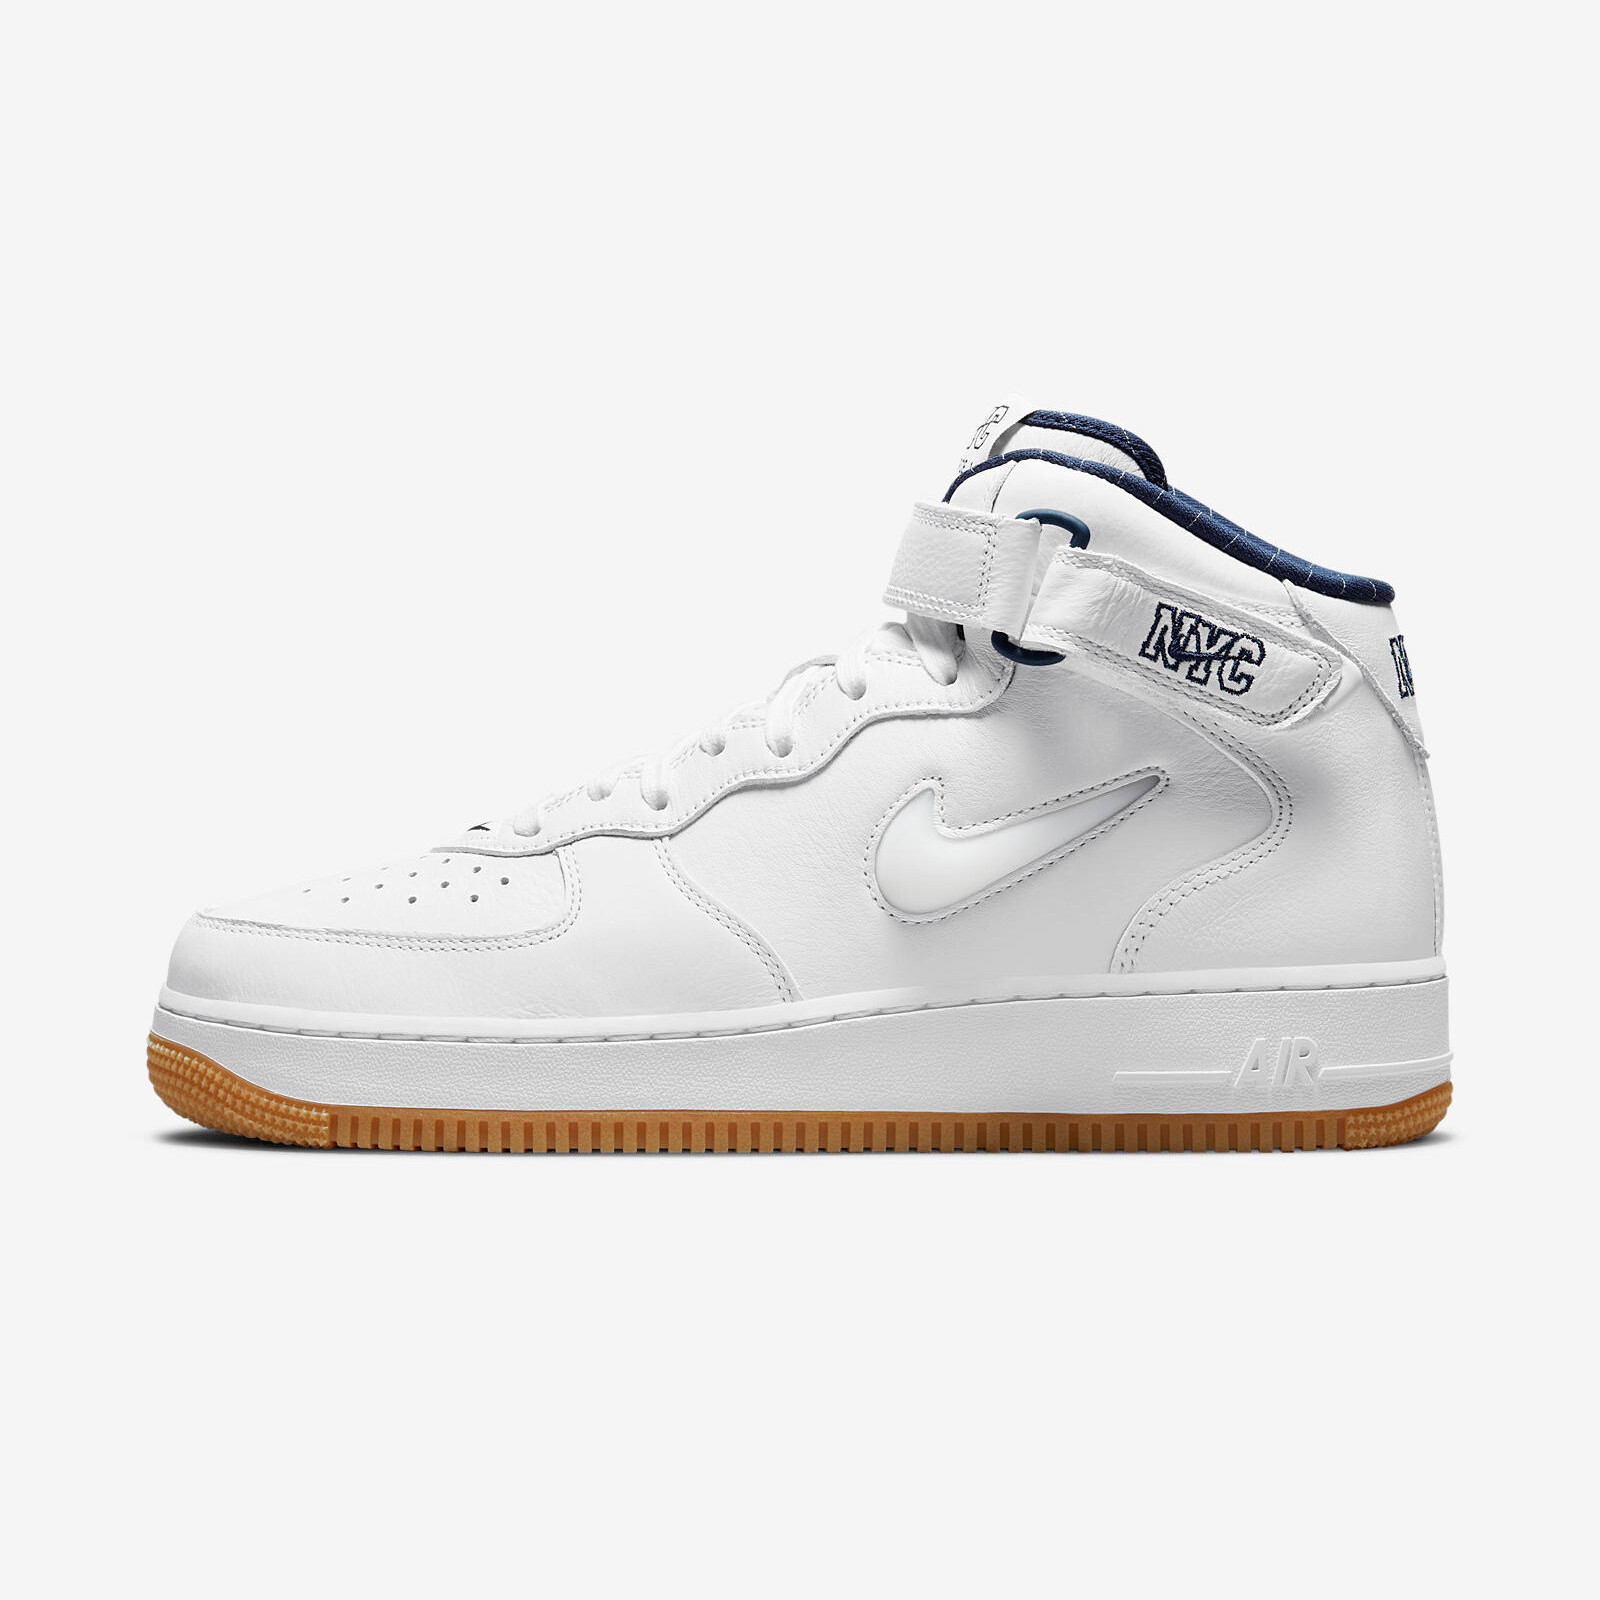 Nike Air Force 1 Mid QS
White / Midnight Navy